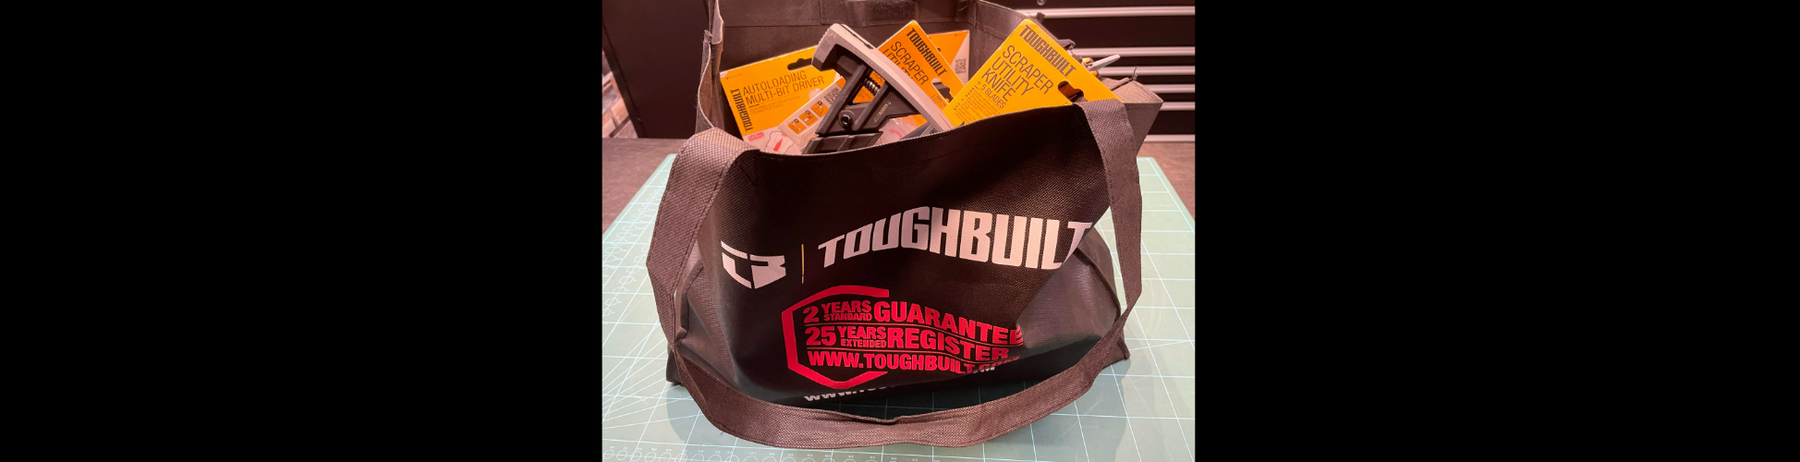 ToughBuilt StackTech accessories and tools - Shadow Foam